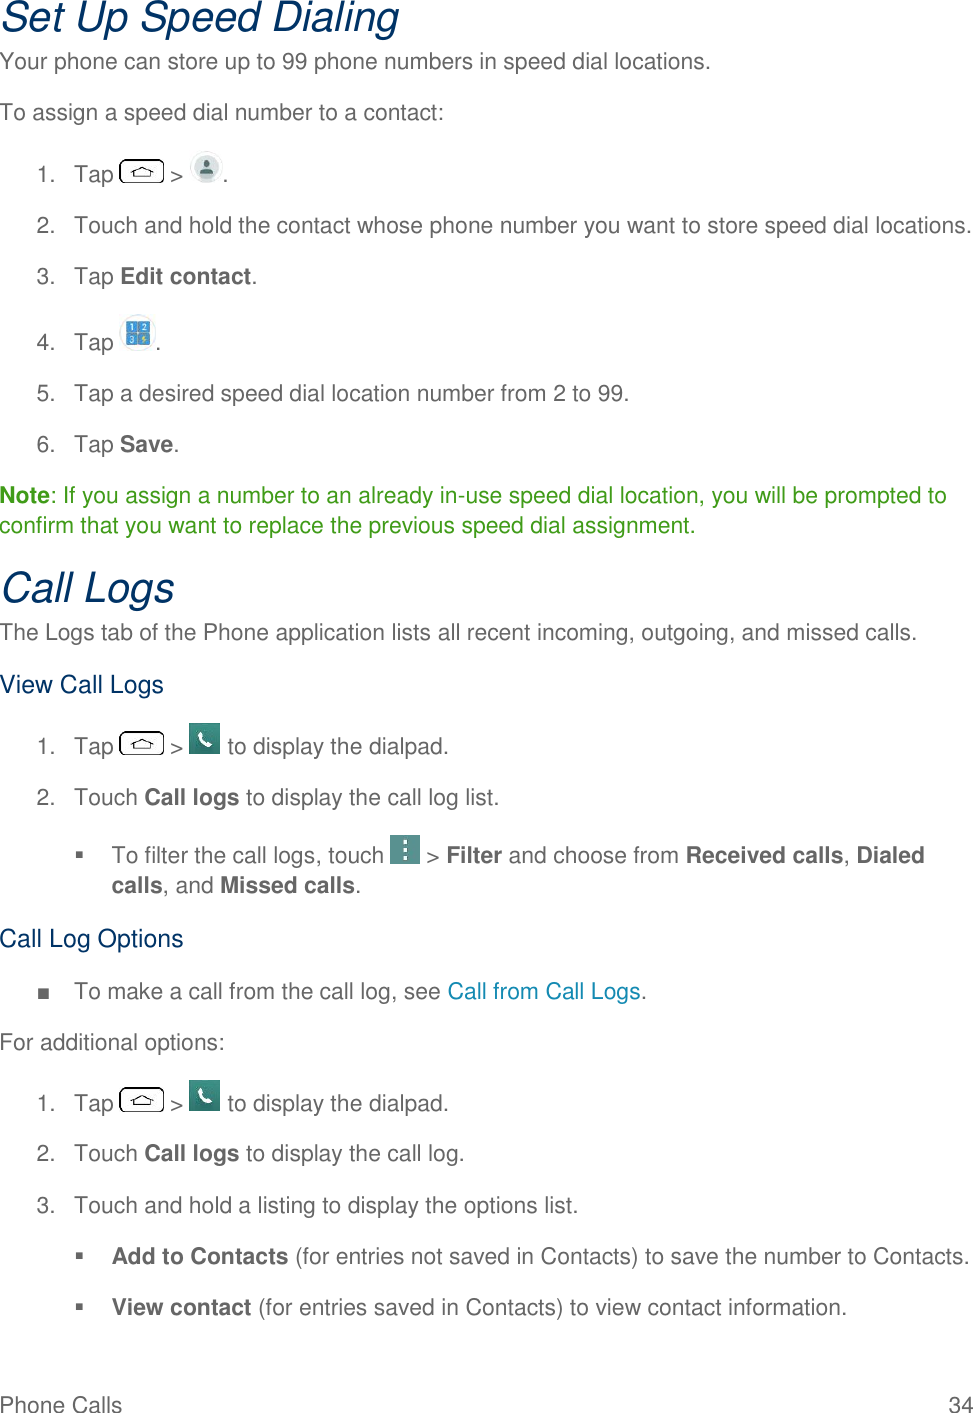 Phone Calls  34 Set Up Speed Dialing Your phone can store up to 99 phone numbers in speed dial locations. To assign a speed dial number to a contact: 1.  Tap   &gt;  . 2.  Touch and hold the contact whose phone number you want to store speed dial locations. 3.  Tap Edit contact. 4.  Tap  . 5.  Tap a desired speed dial location number from 2 to 99. 6.  Tap Save. Note: If you assign a number to an already in-use speed dial location, you will be prompted to confirm that you want to replace the previous speed dial assignment. Call Logs The Logs tab of the Phone application lists all recent incoming, outgoing, and missed calls. View Call Logs 1.  Tap   &gt;   to display the dialpad. 2.  Touch Call logs to display the call log list.   To filter the call logs, touch   &gt; Filter and choose from Received calls, Dialed calls, and Missed calls. Call Log Options ■  To make a call from the call log, see Call from Call Logs. For additional options: 1.  Tap   &gt;   to display the dialpad. 2.  Touch Call logs to display the call log. 3.  Touch and hold a listing to display the options list.  Add to Contacts (for entries not saved in Contacts) to save the number to Contacts.   View contact (for entries saved in Contacts) to view contact information.  